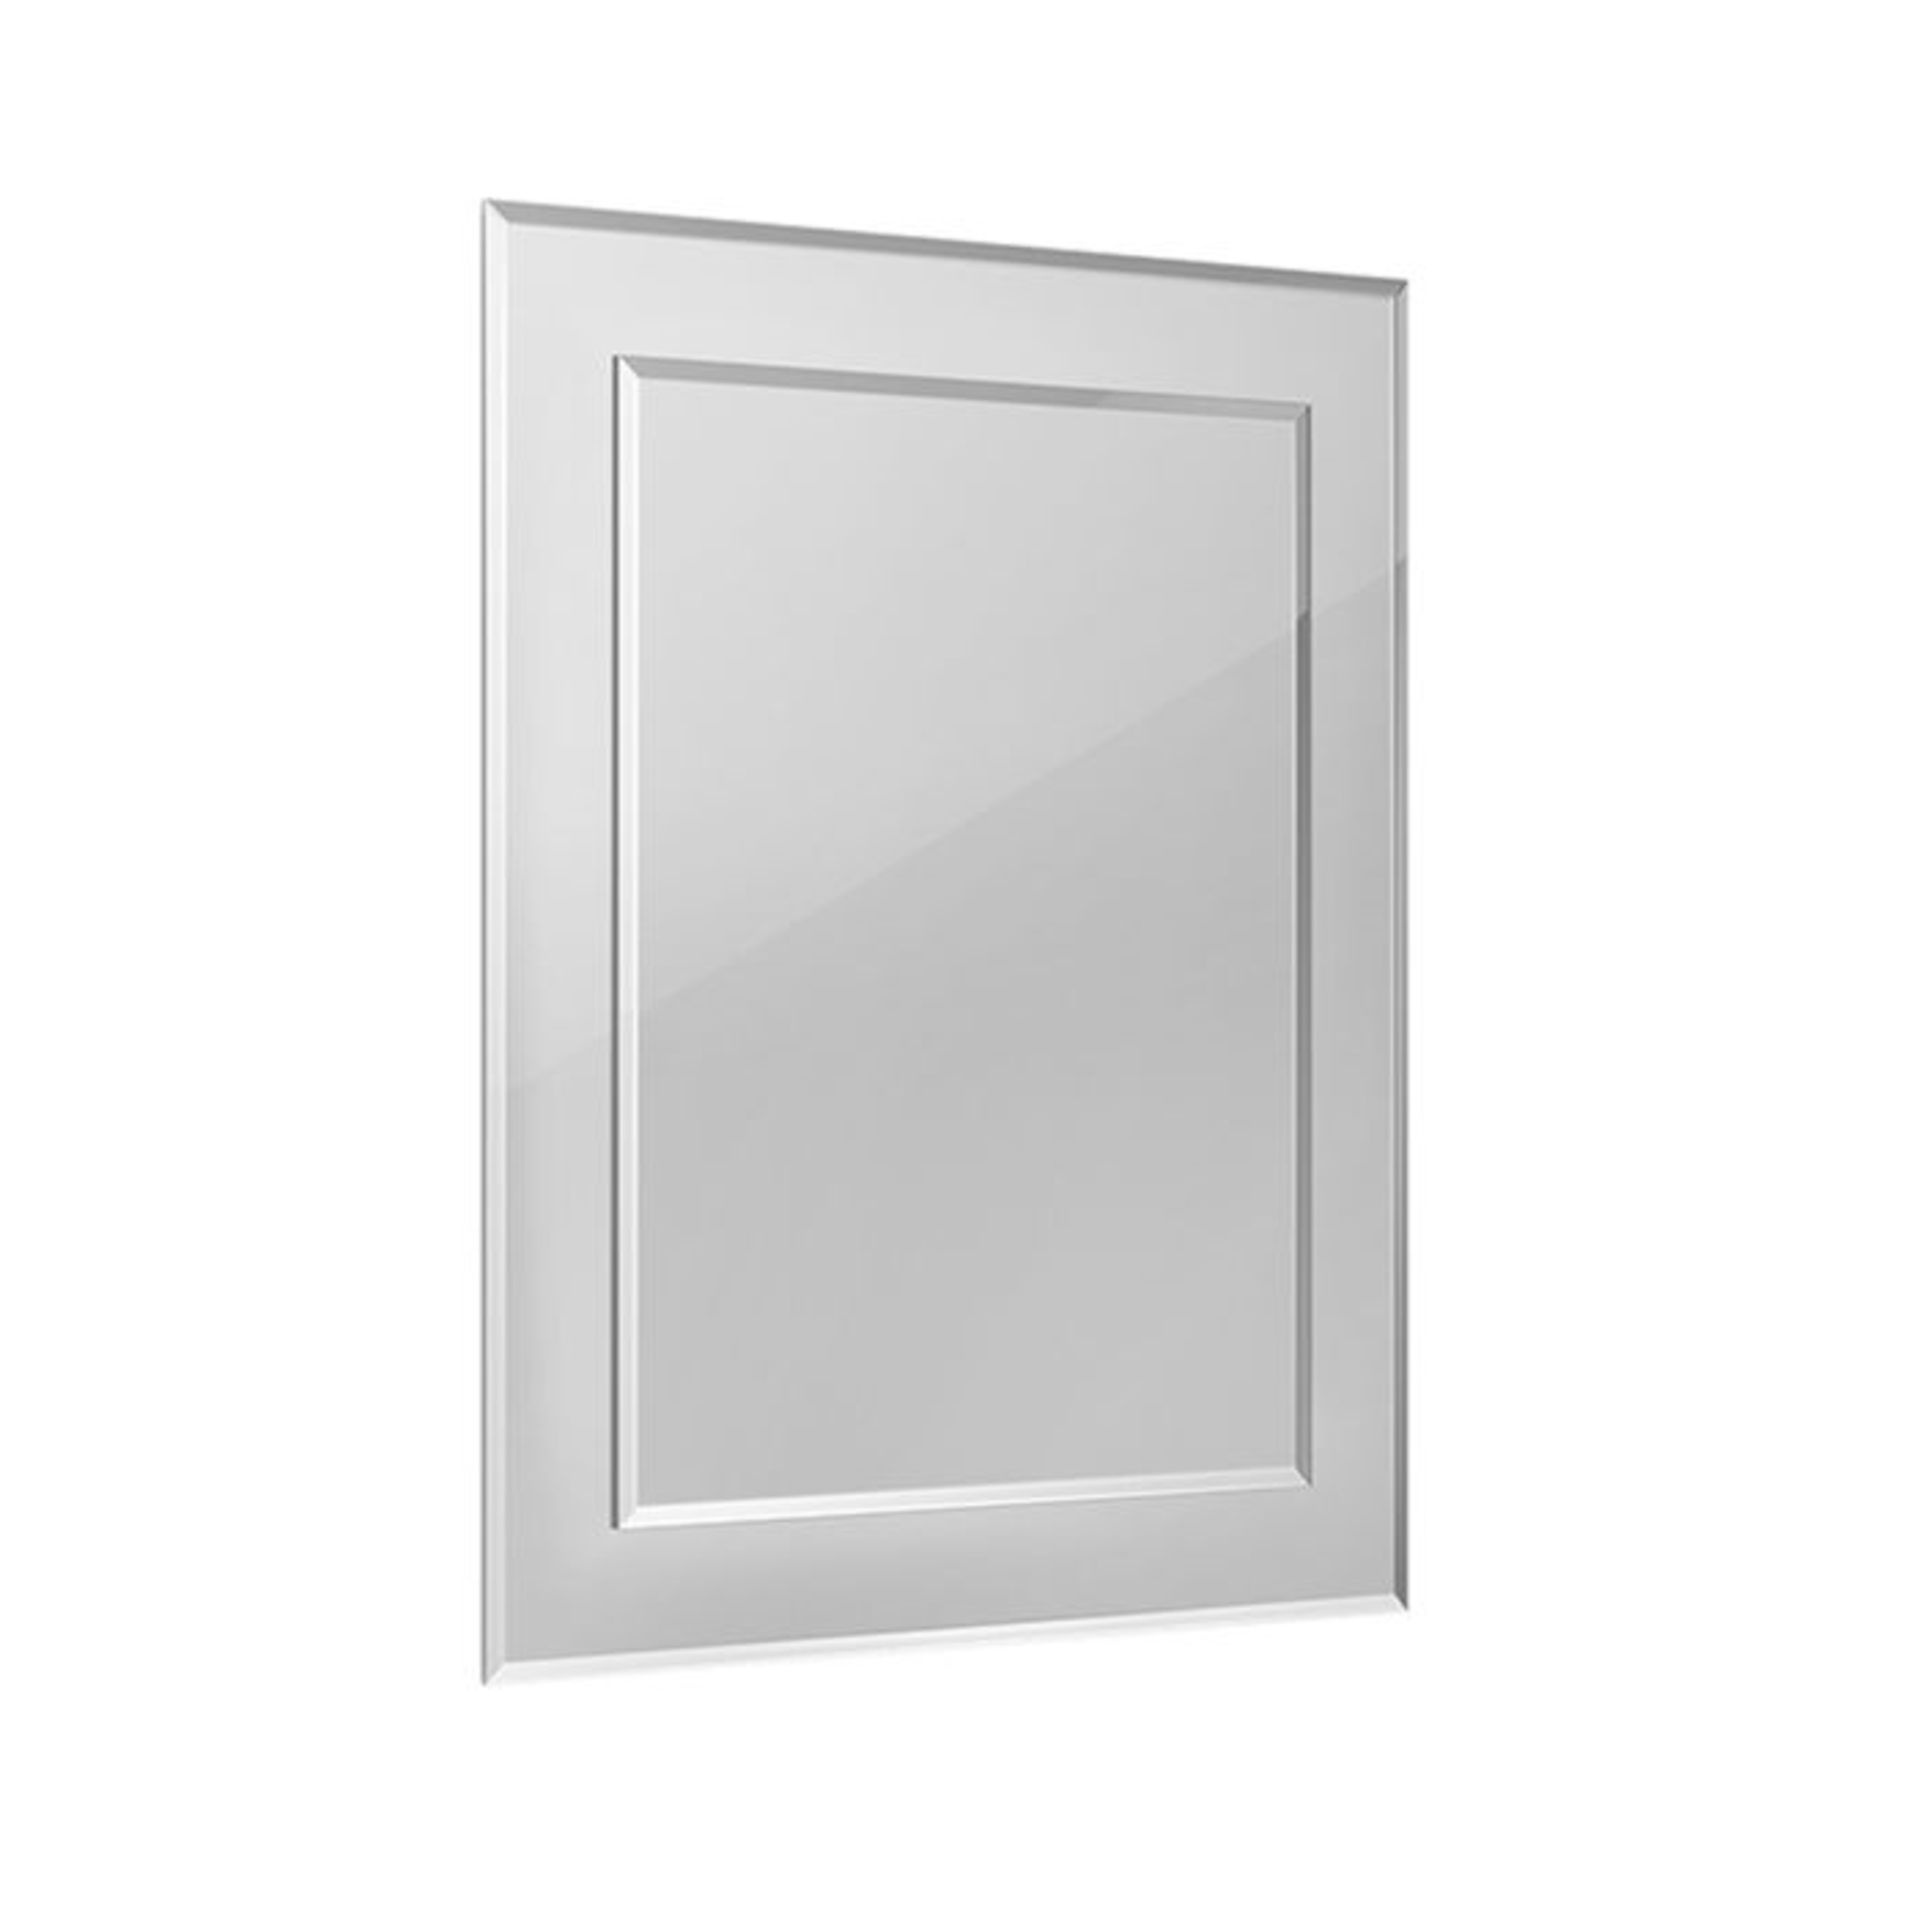 (XX40) 400x500mm Bevel Mirror. Smooth beveled edge for additional safety Supplied fully assem...